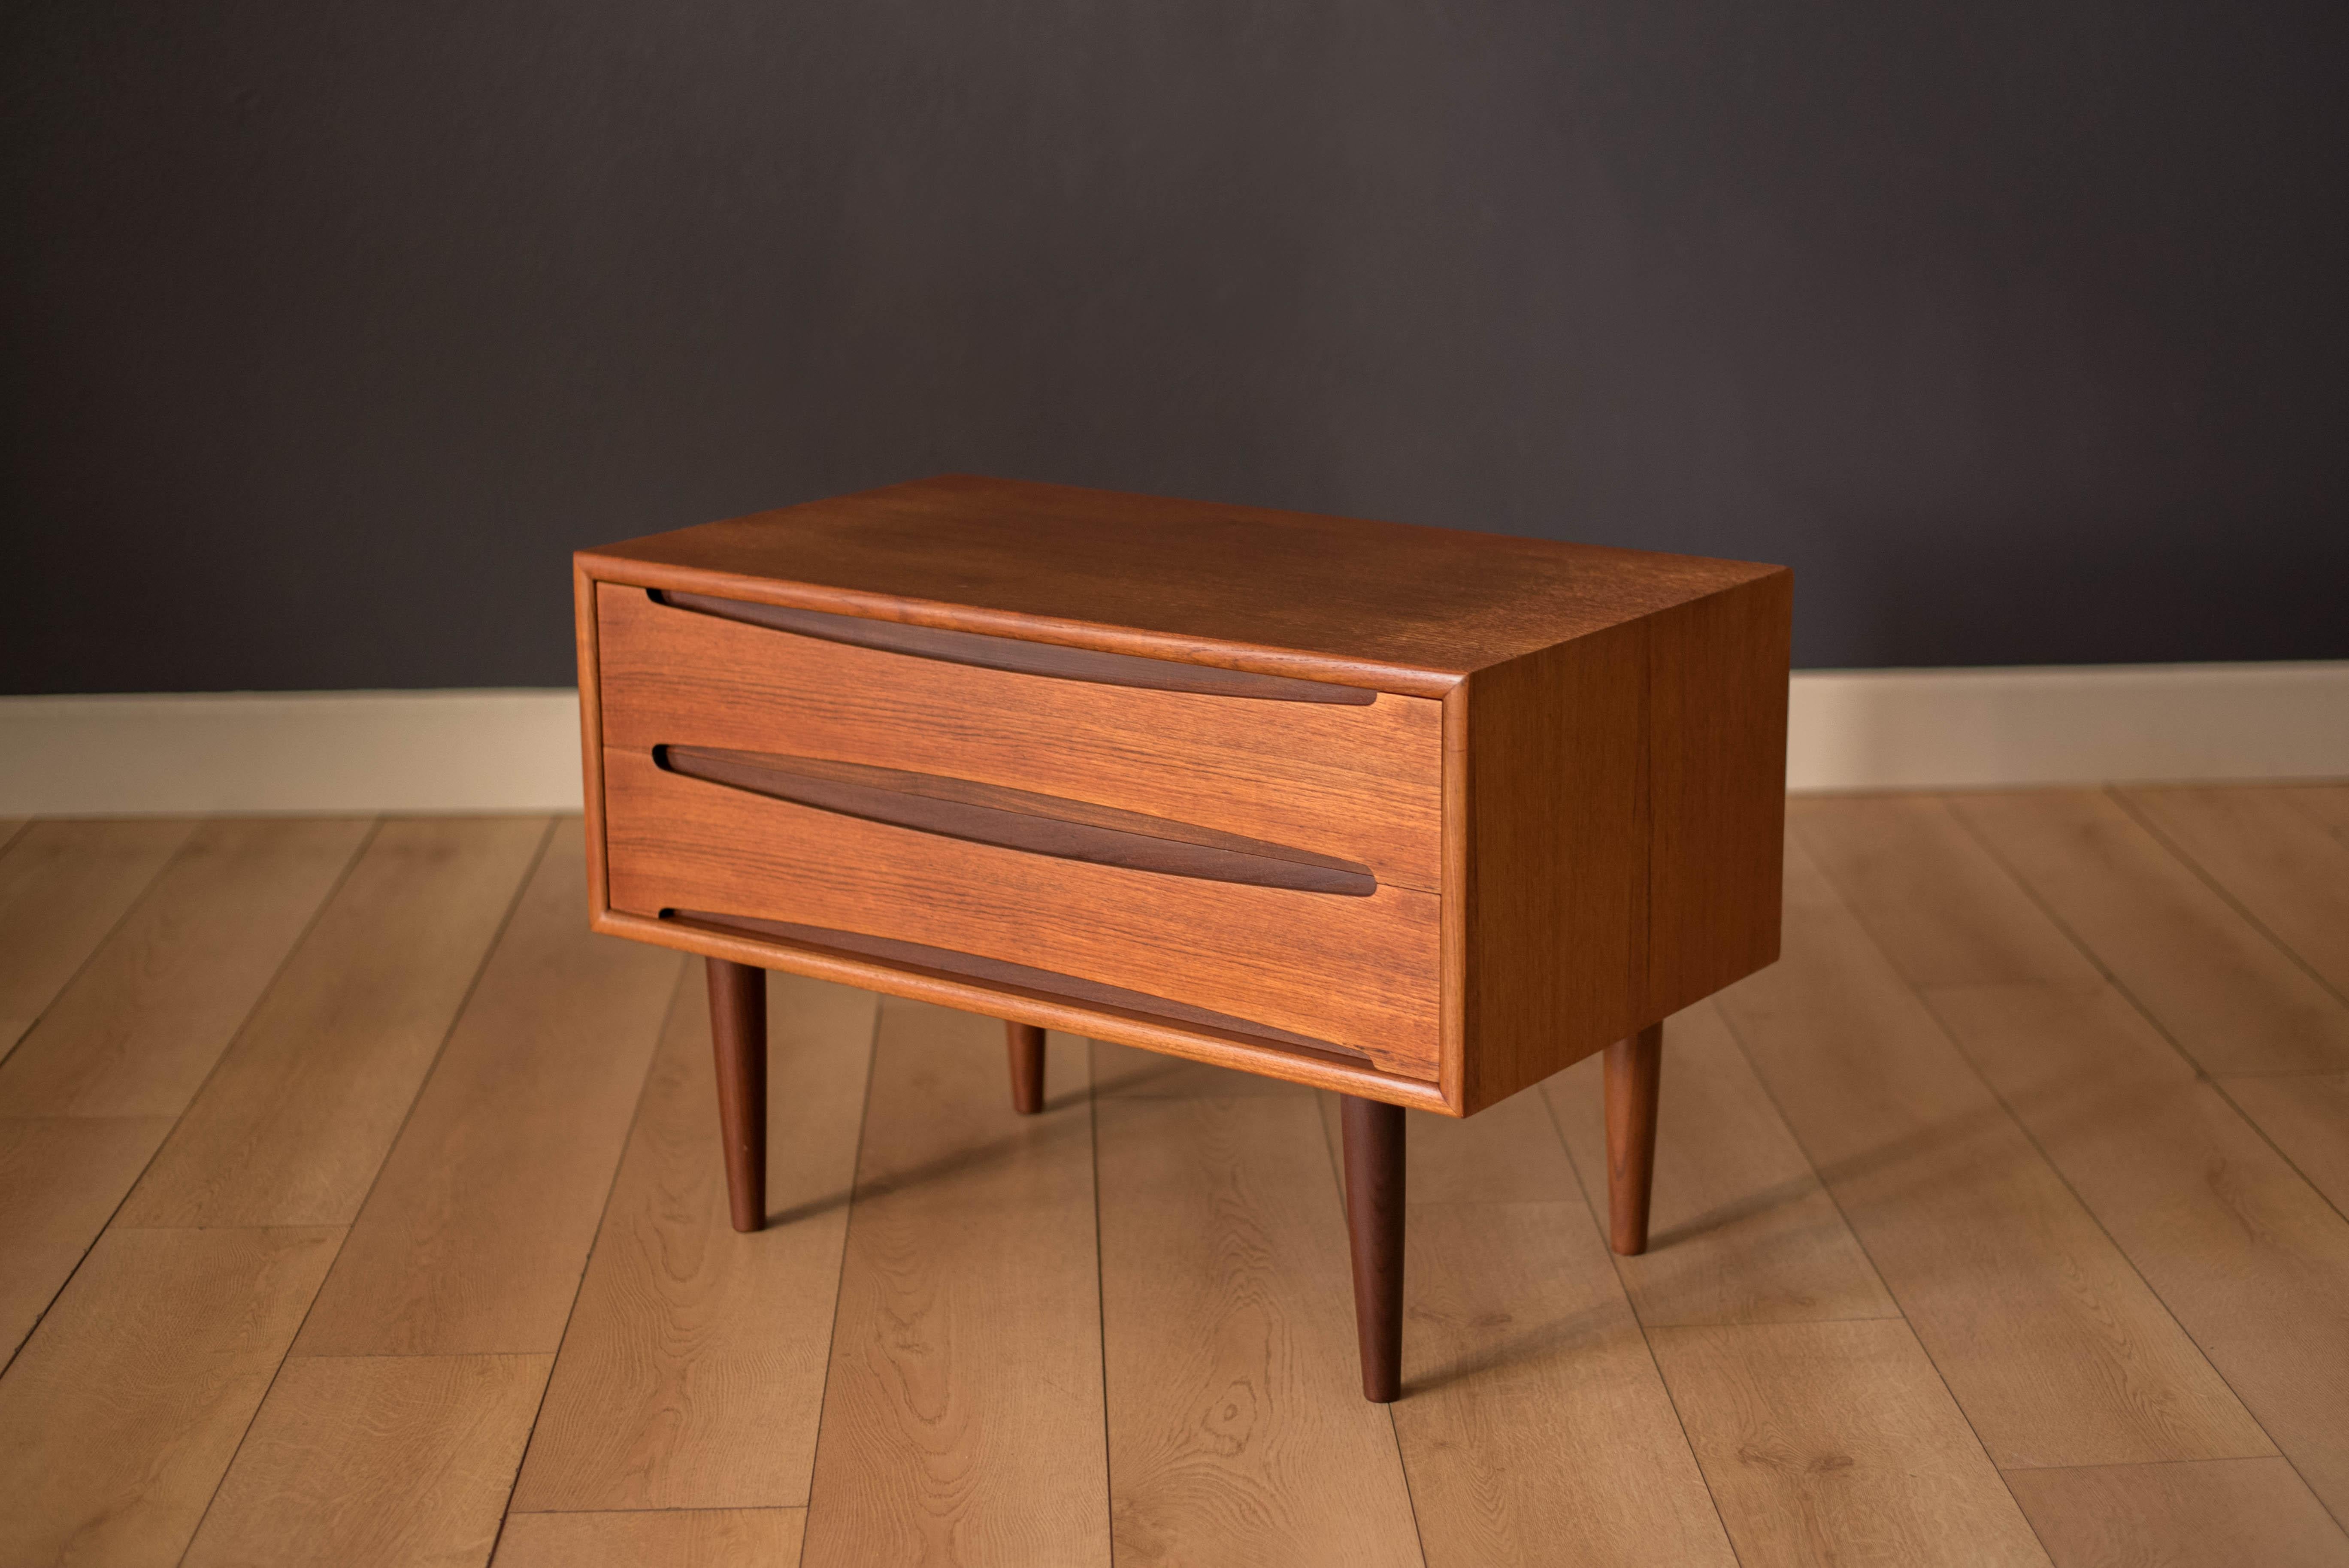 Mid-Century Modern small chest of drawers in teak manufactured by Dyrlund, circa 1960s. This piece includes two dovetailed drawers with sculpted handles and Classic dowel legs. Perfect to use as an entryway storage chest or nightstand.



Offered by